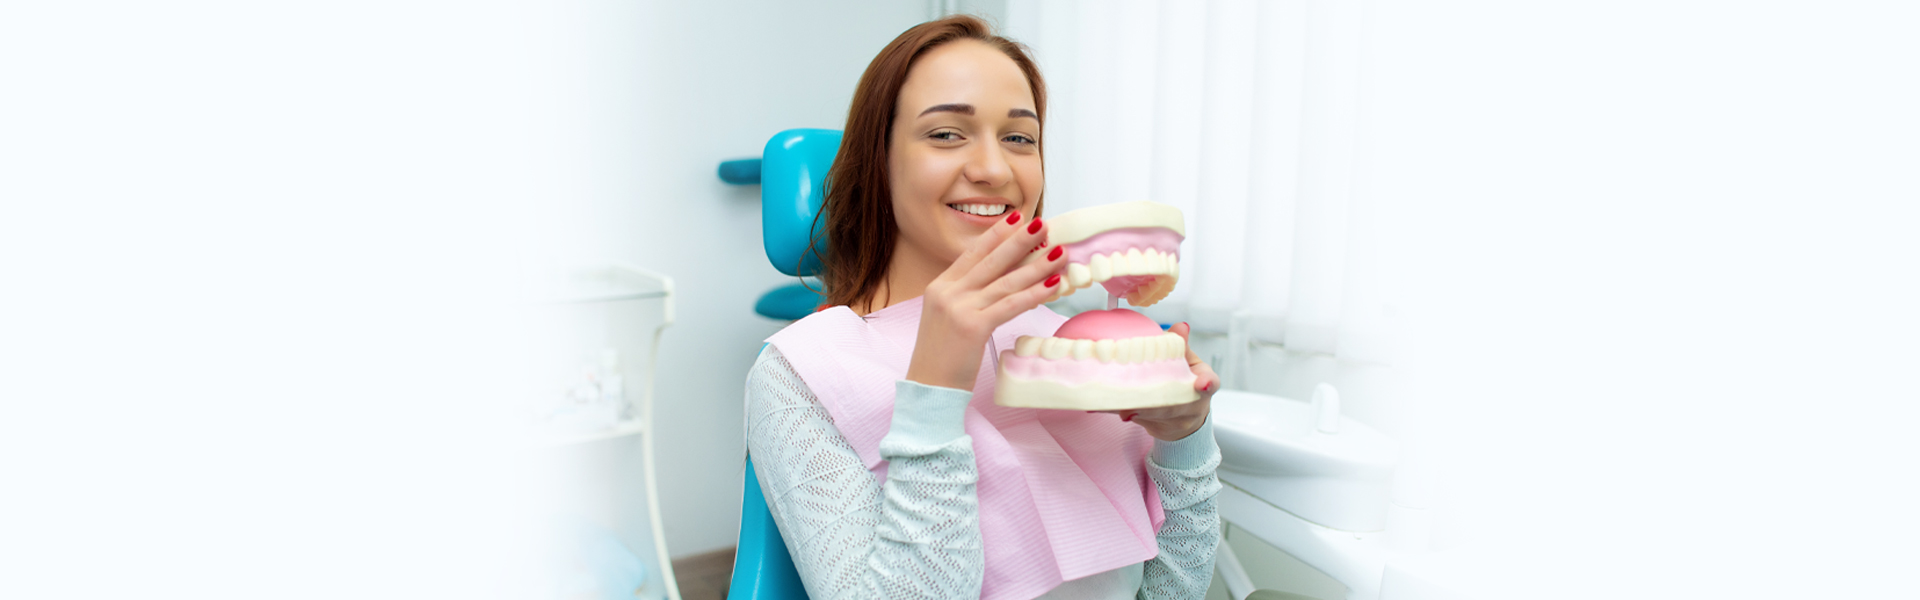 Dental Extractions – Three Things You Need to Know Before Getting Your Teeth Removed